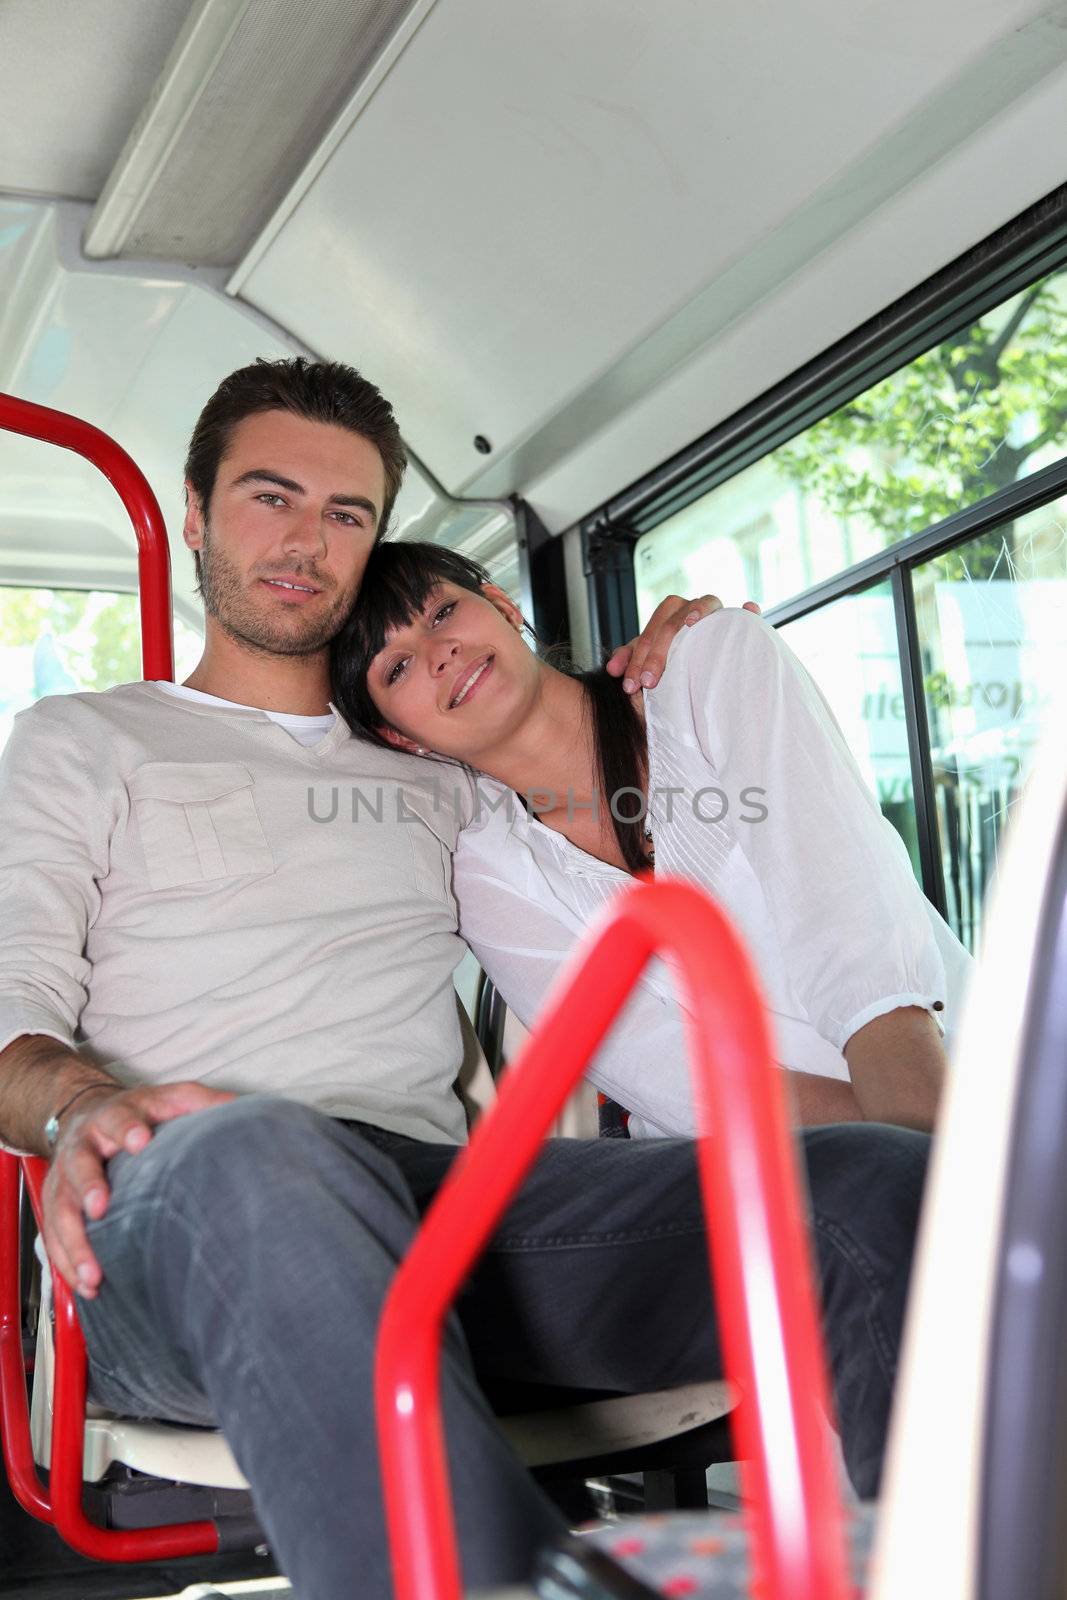 Couple sitting on a bus